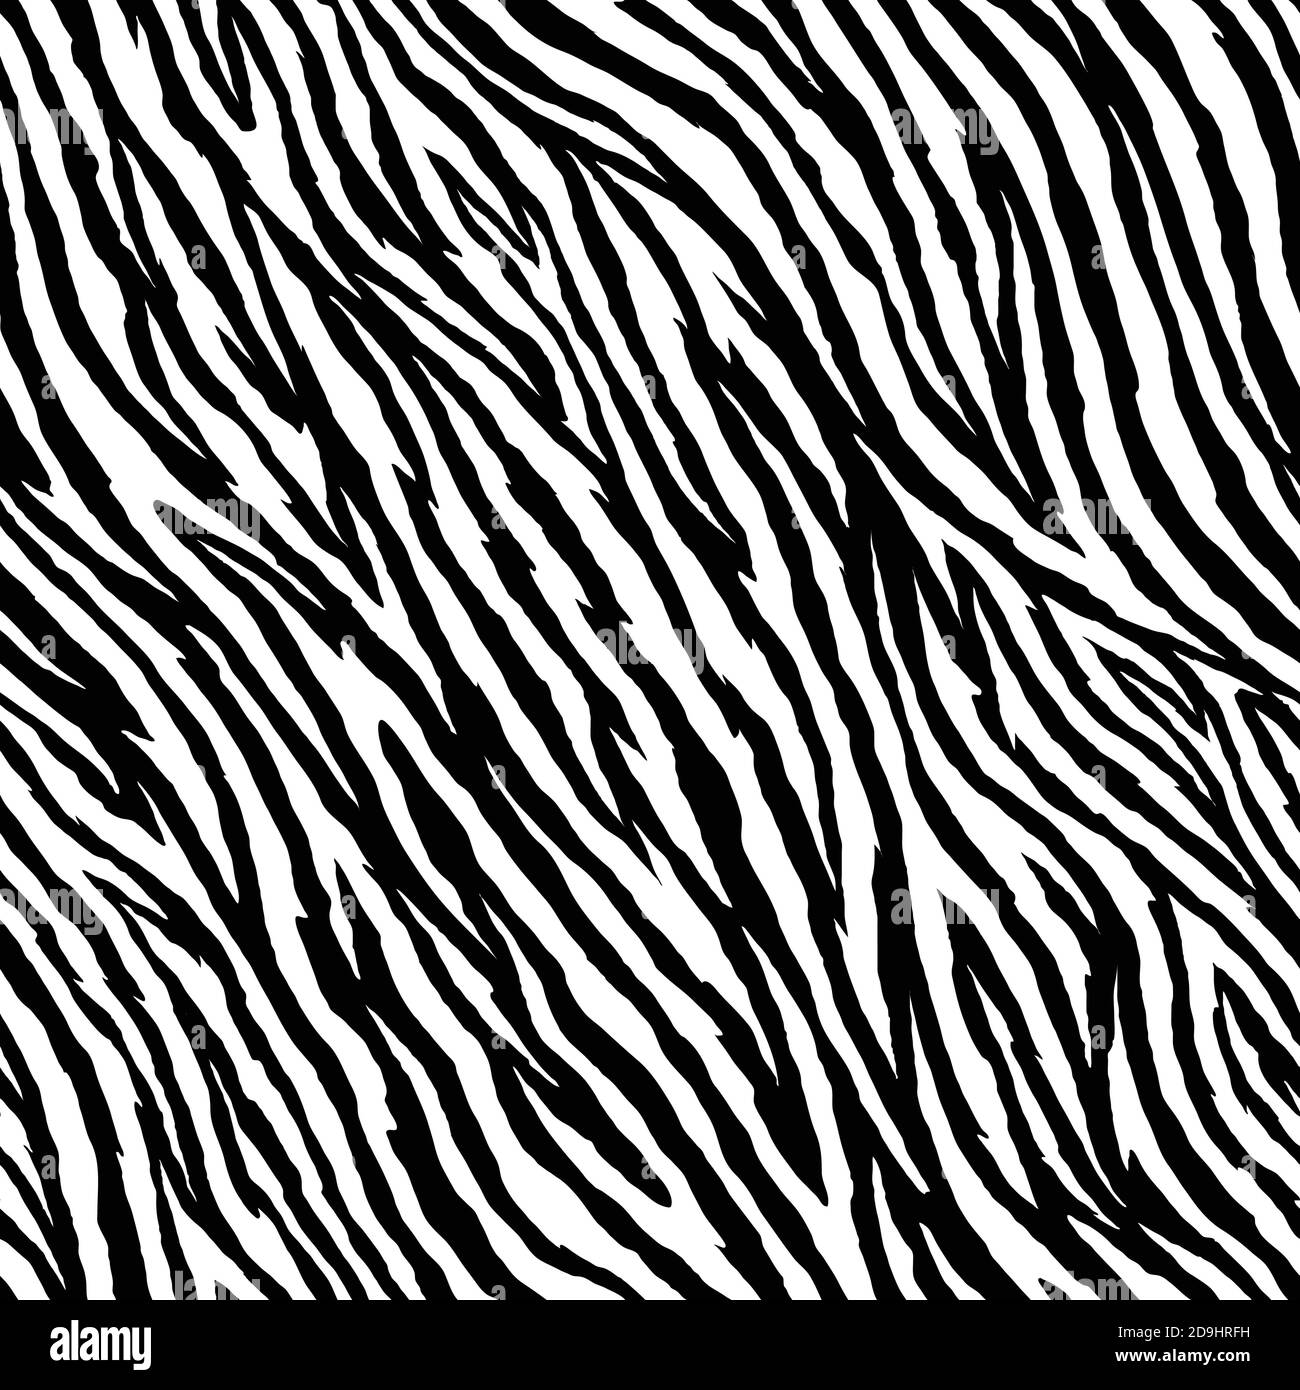 Zebra seamless pattern. Animal skin vector illustration pattern for surface, t shirt design, print, poster, icon, web, graphic designs. Stock Vector